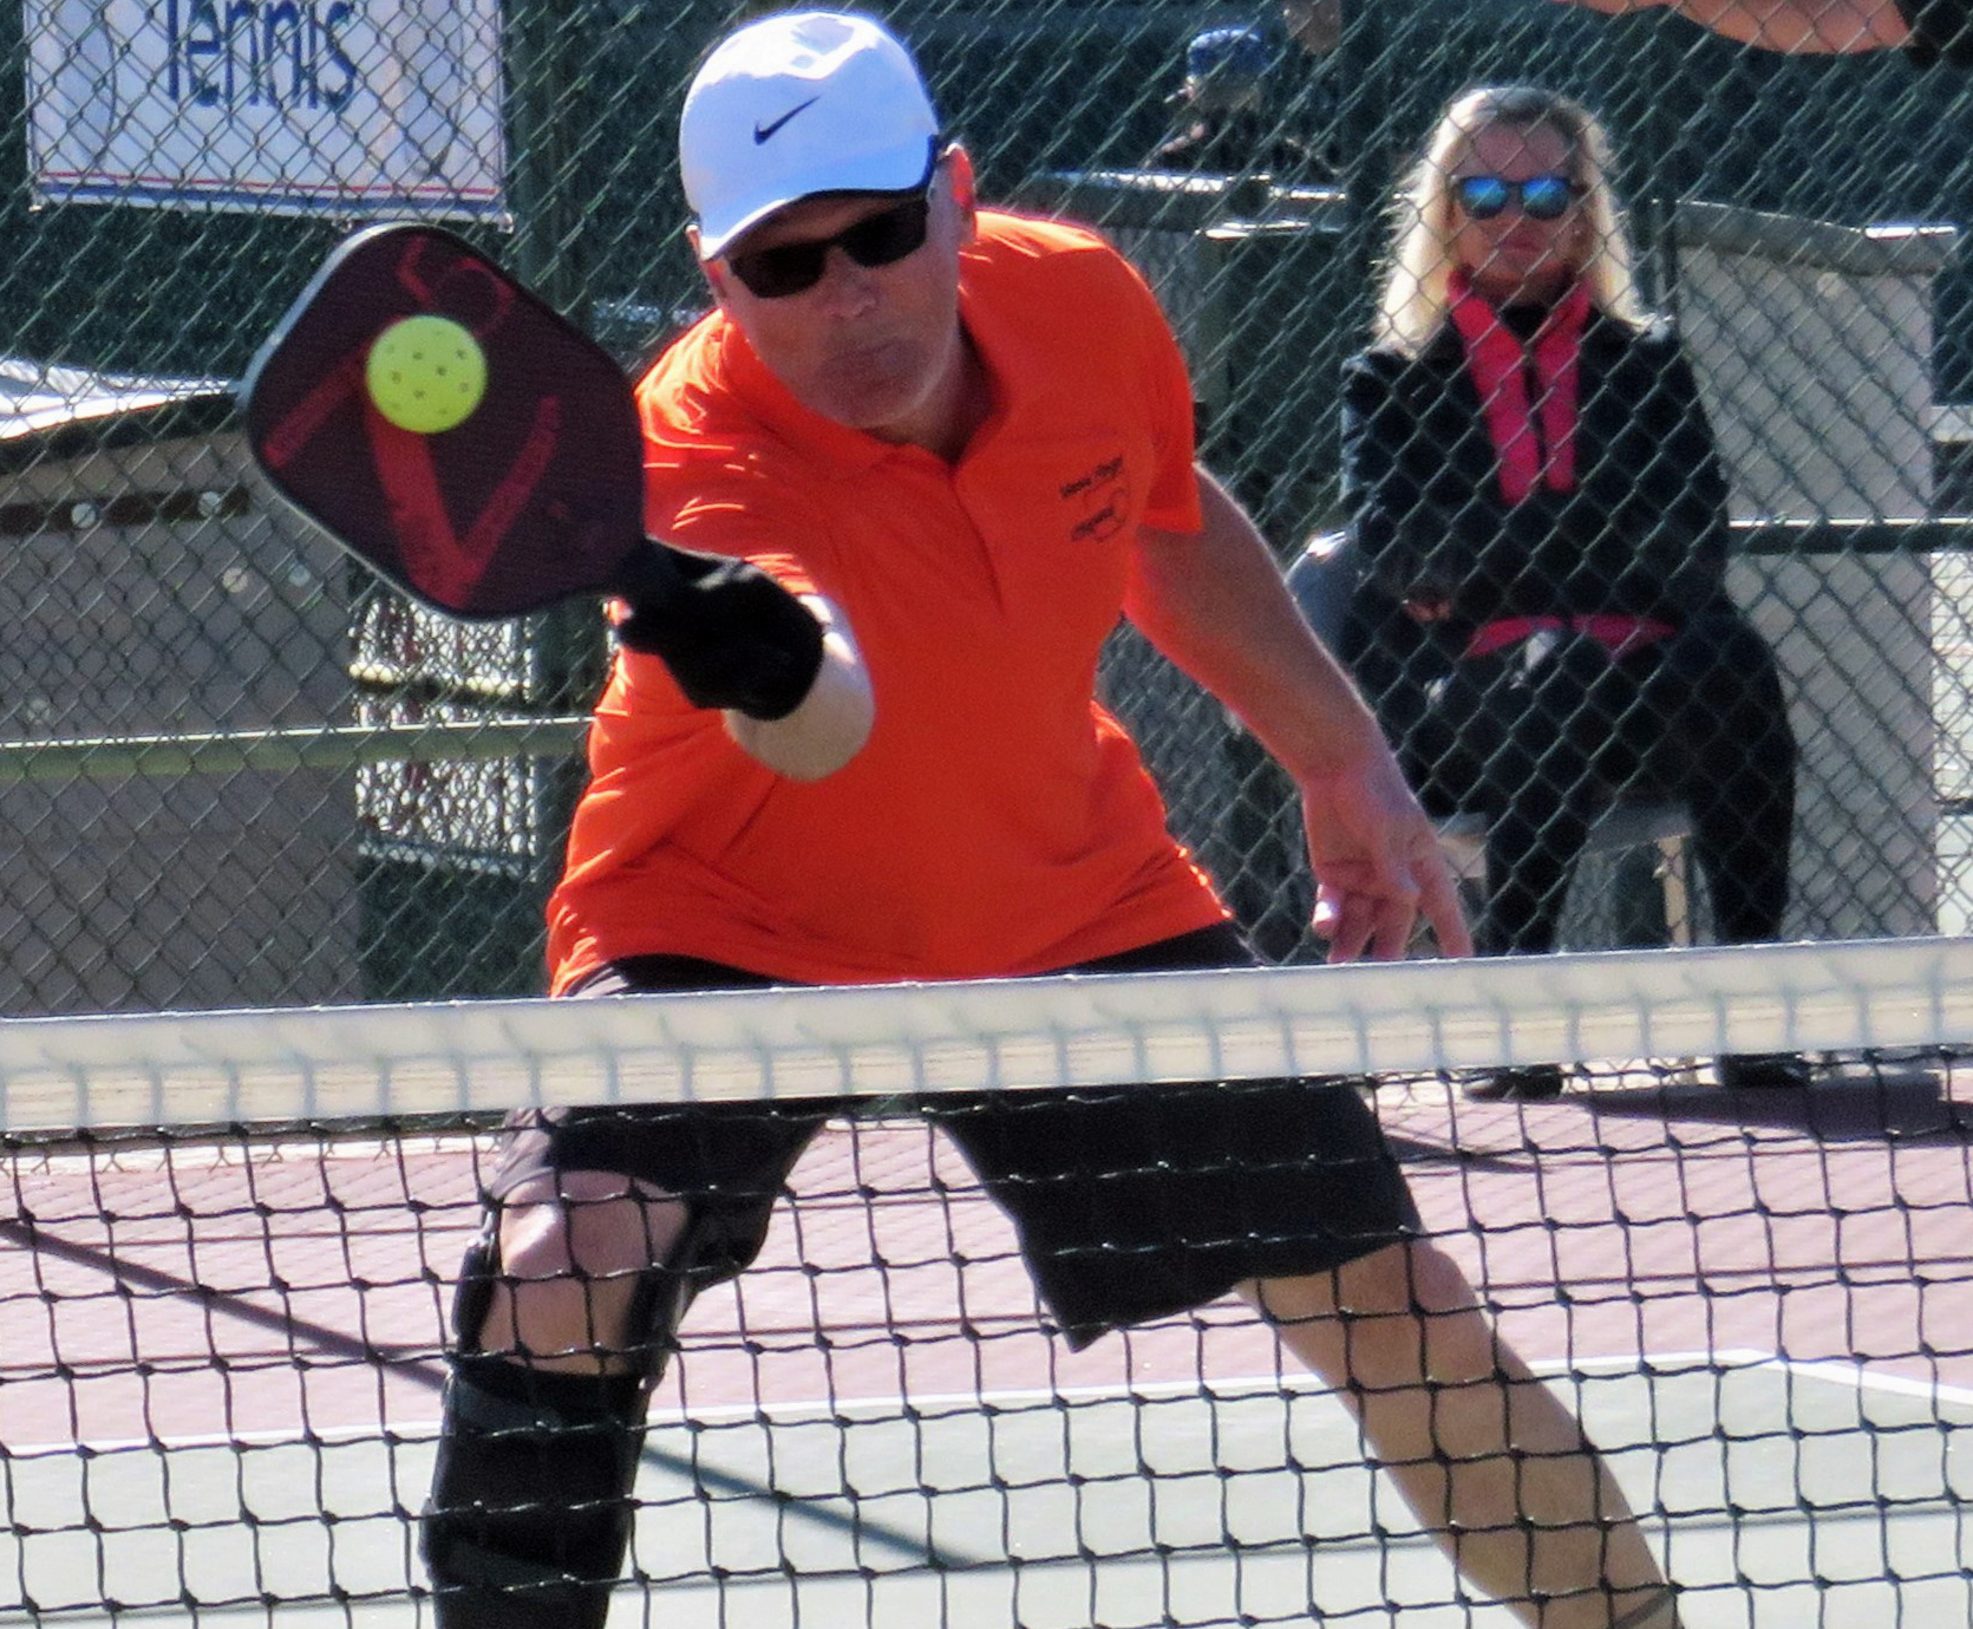 City of Clay amends schedule for Alabama Open Pickleball tournament